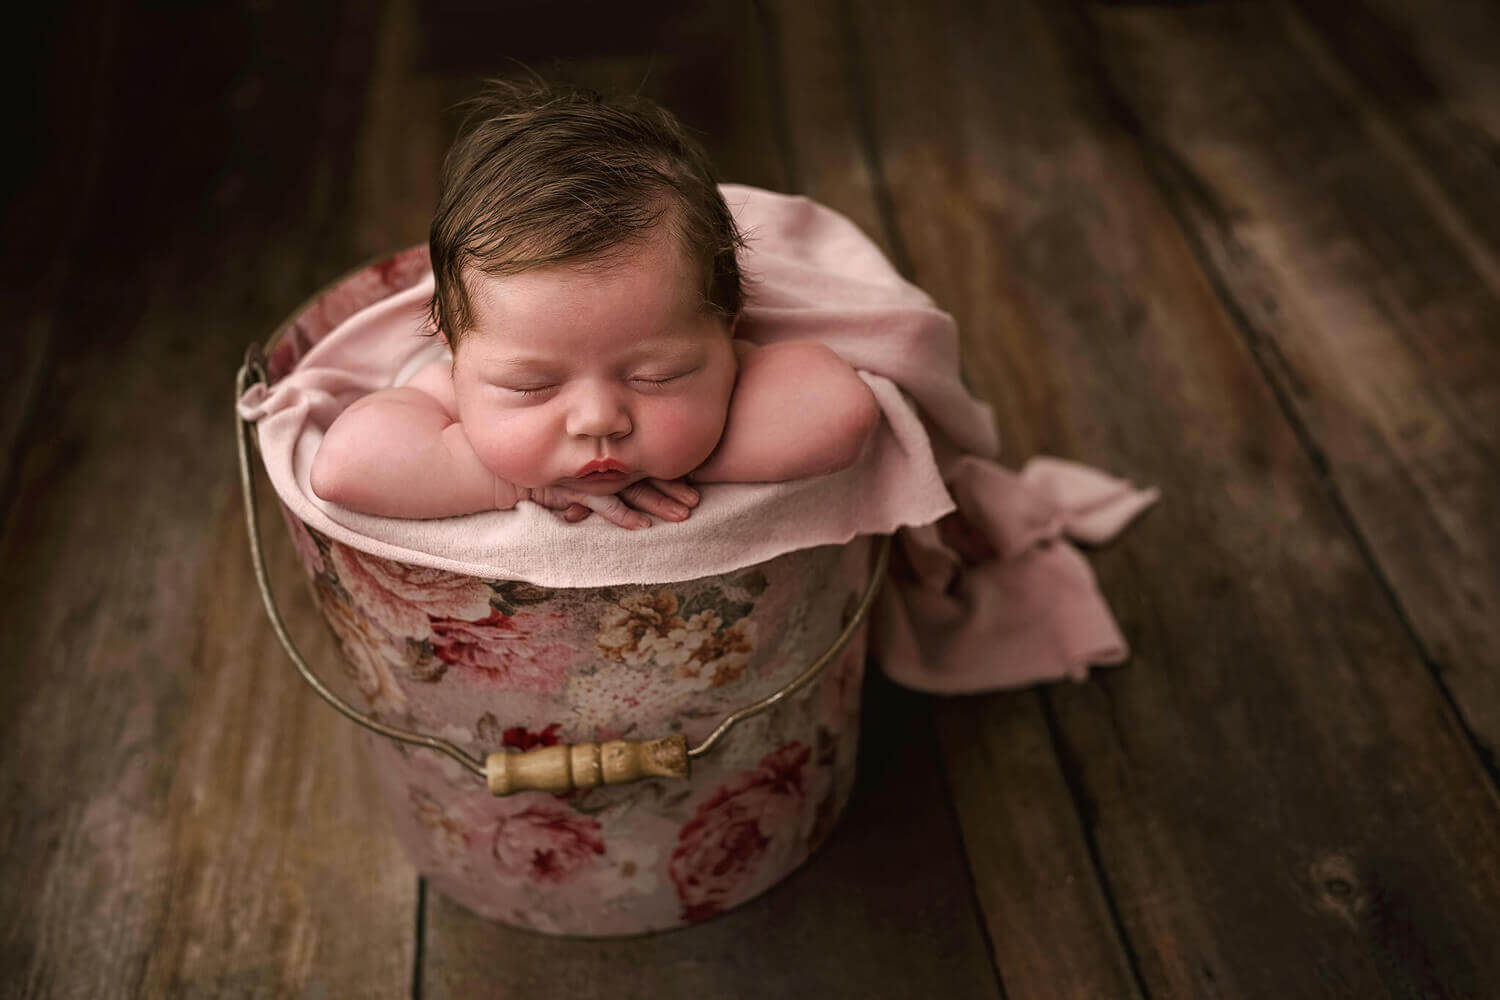 Capture precious moments with professional newborn photography in Essex. Watch as your little one peacefully sleeps in a bucket on a wooden floor, creating timeless memories to cherish forever.